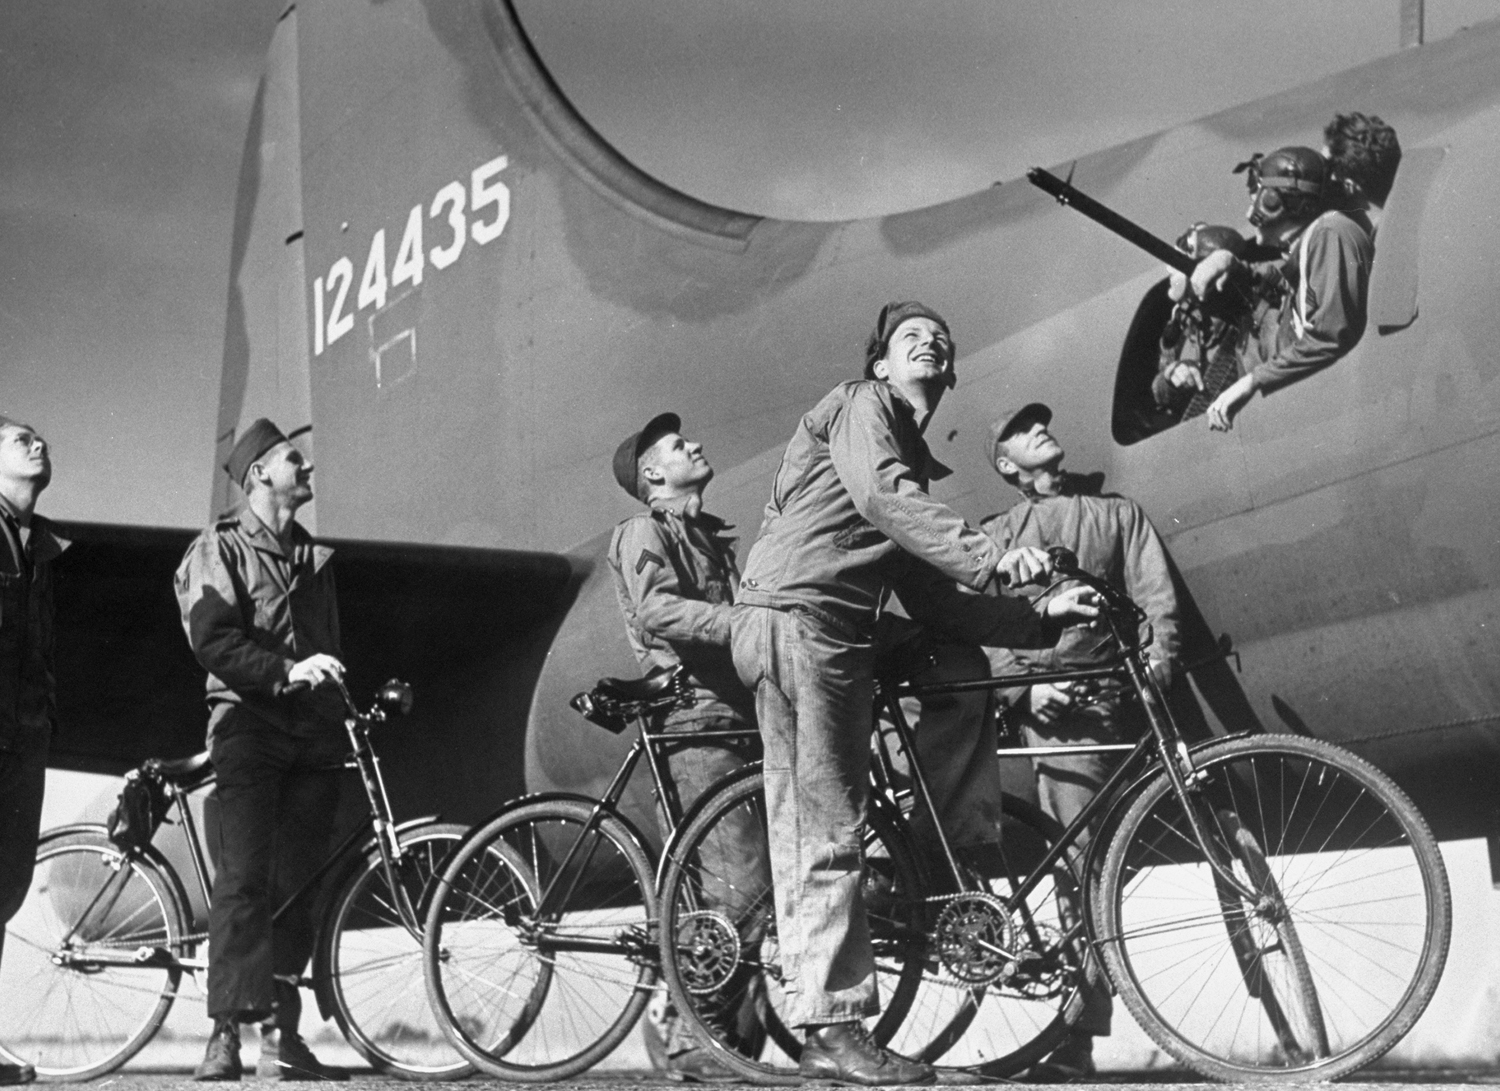 A B-17 Flying Fortress' ground crew bids goodbye to Fortress gunners before bomber takes off on a raid in Europe, 1942.